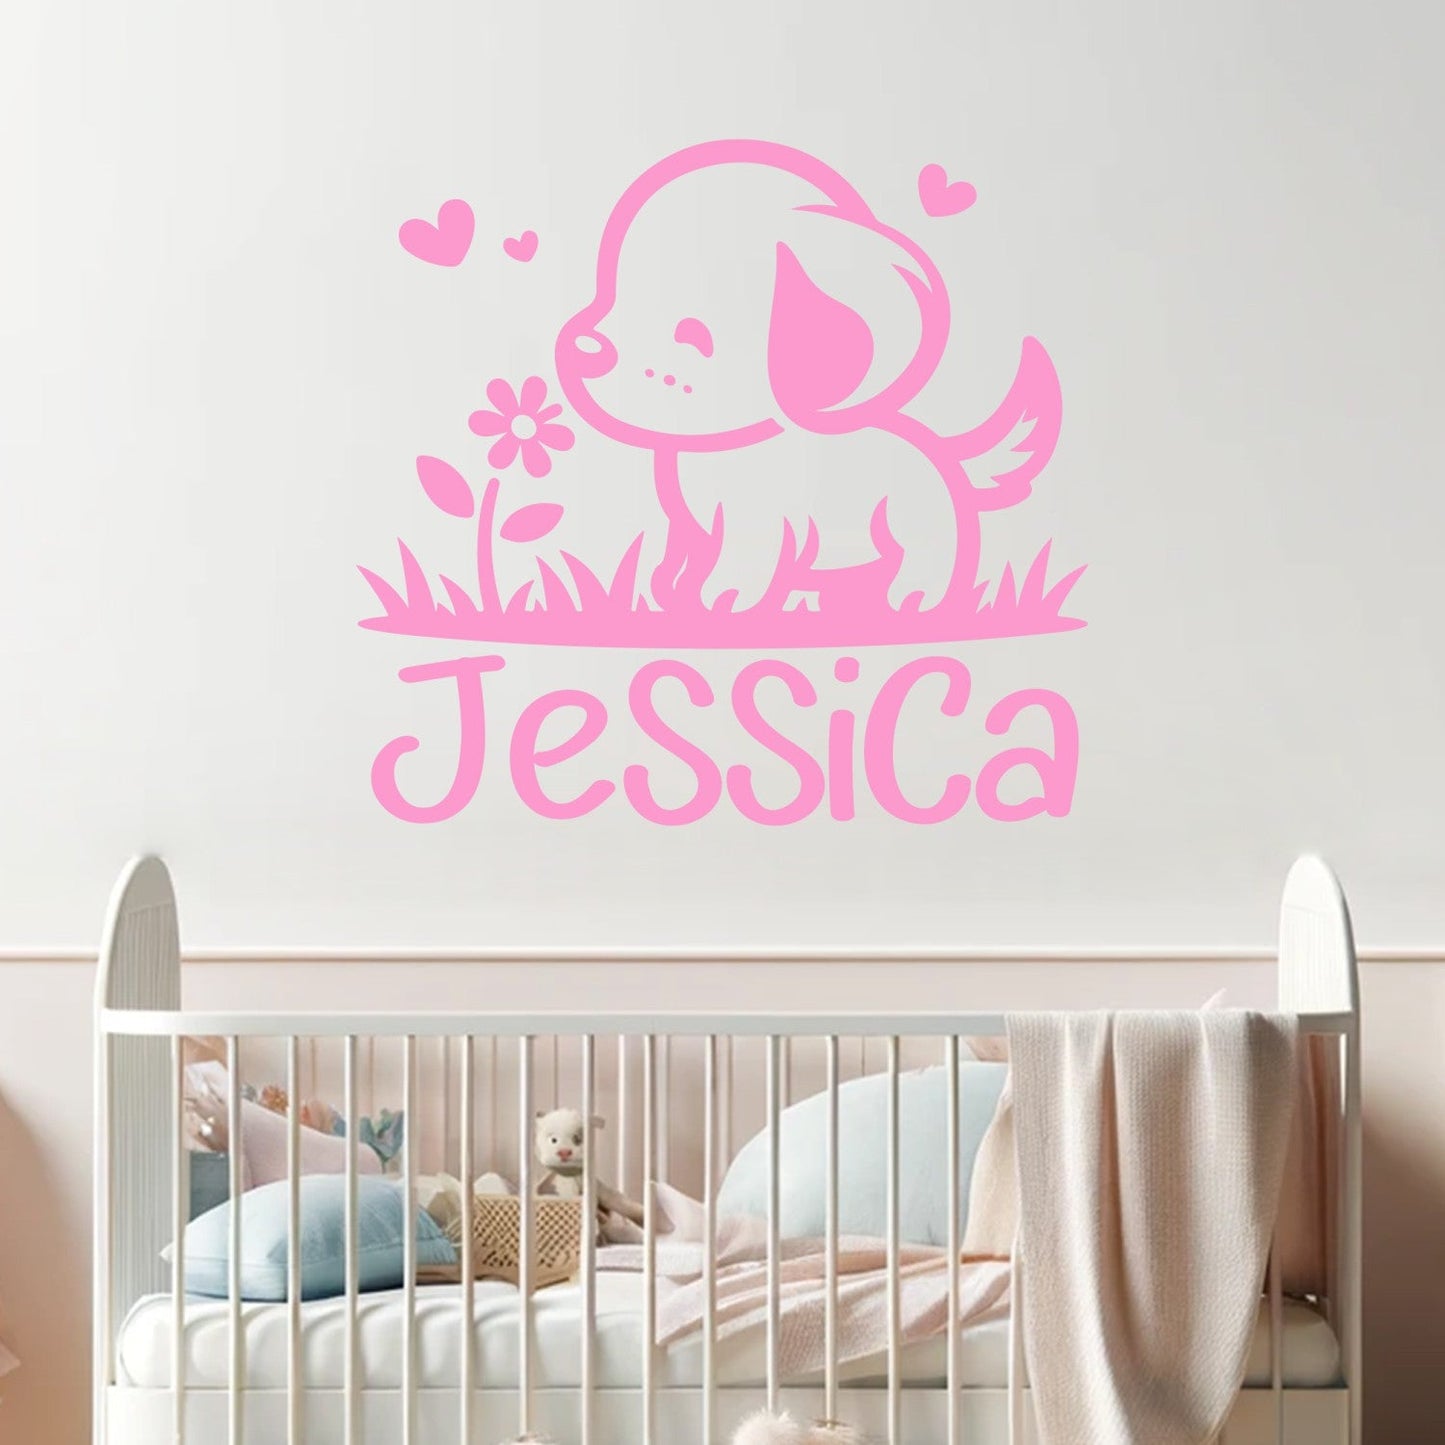 Dog Wall Stickers - Custom Name Wall Decals for Kids - Nursery Wall Decal with Custom Name - Puppy Wall Decals with Personalized Name